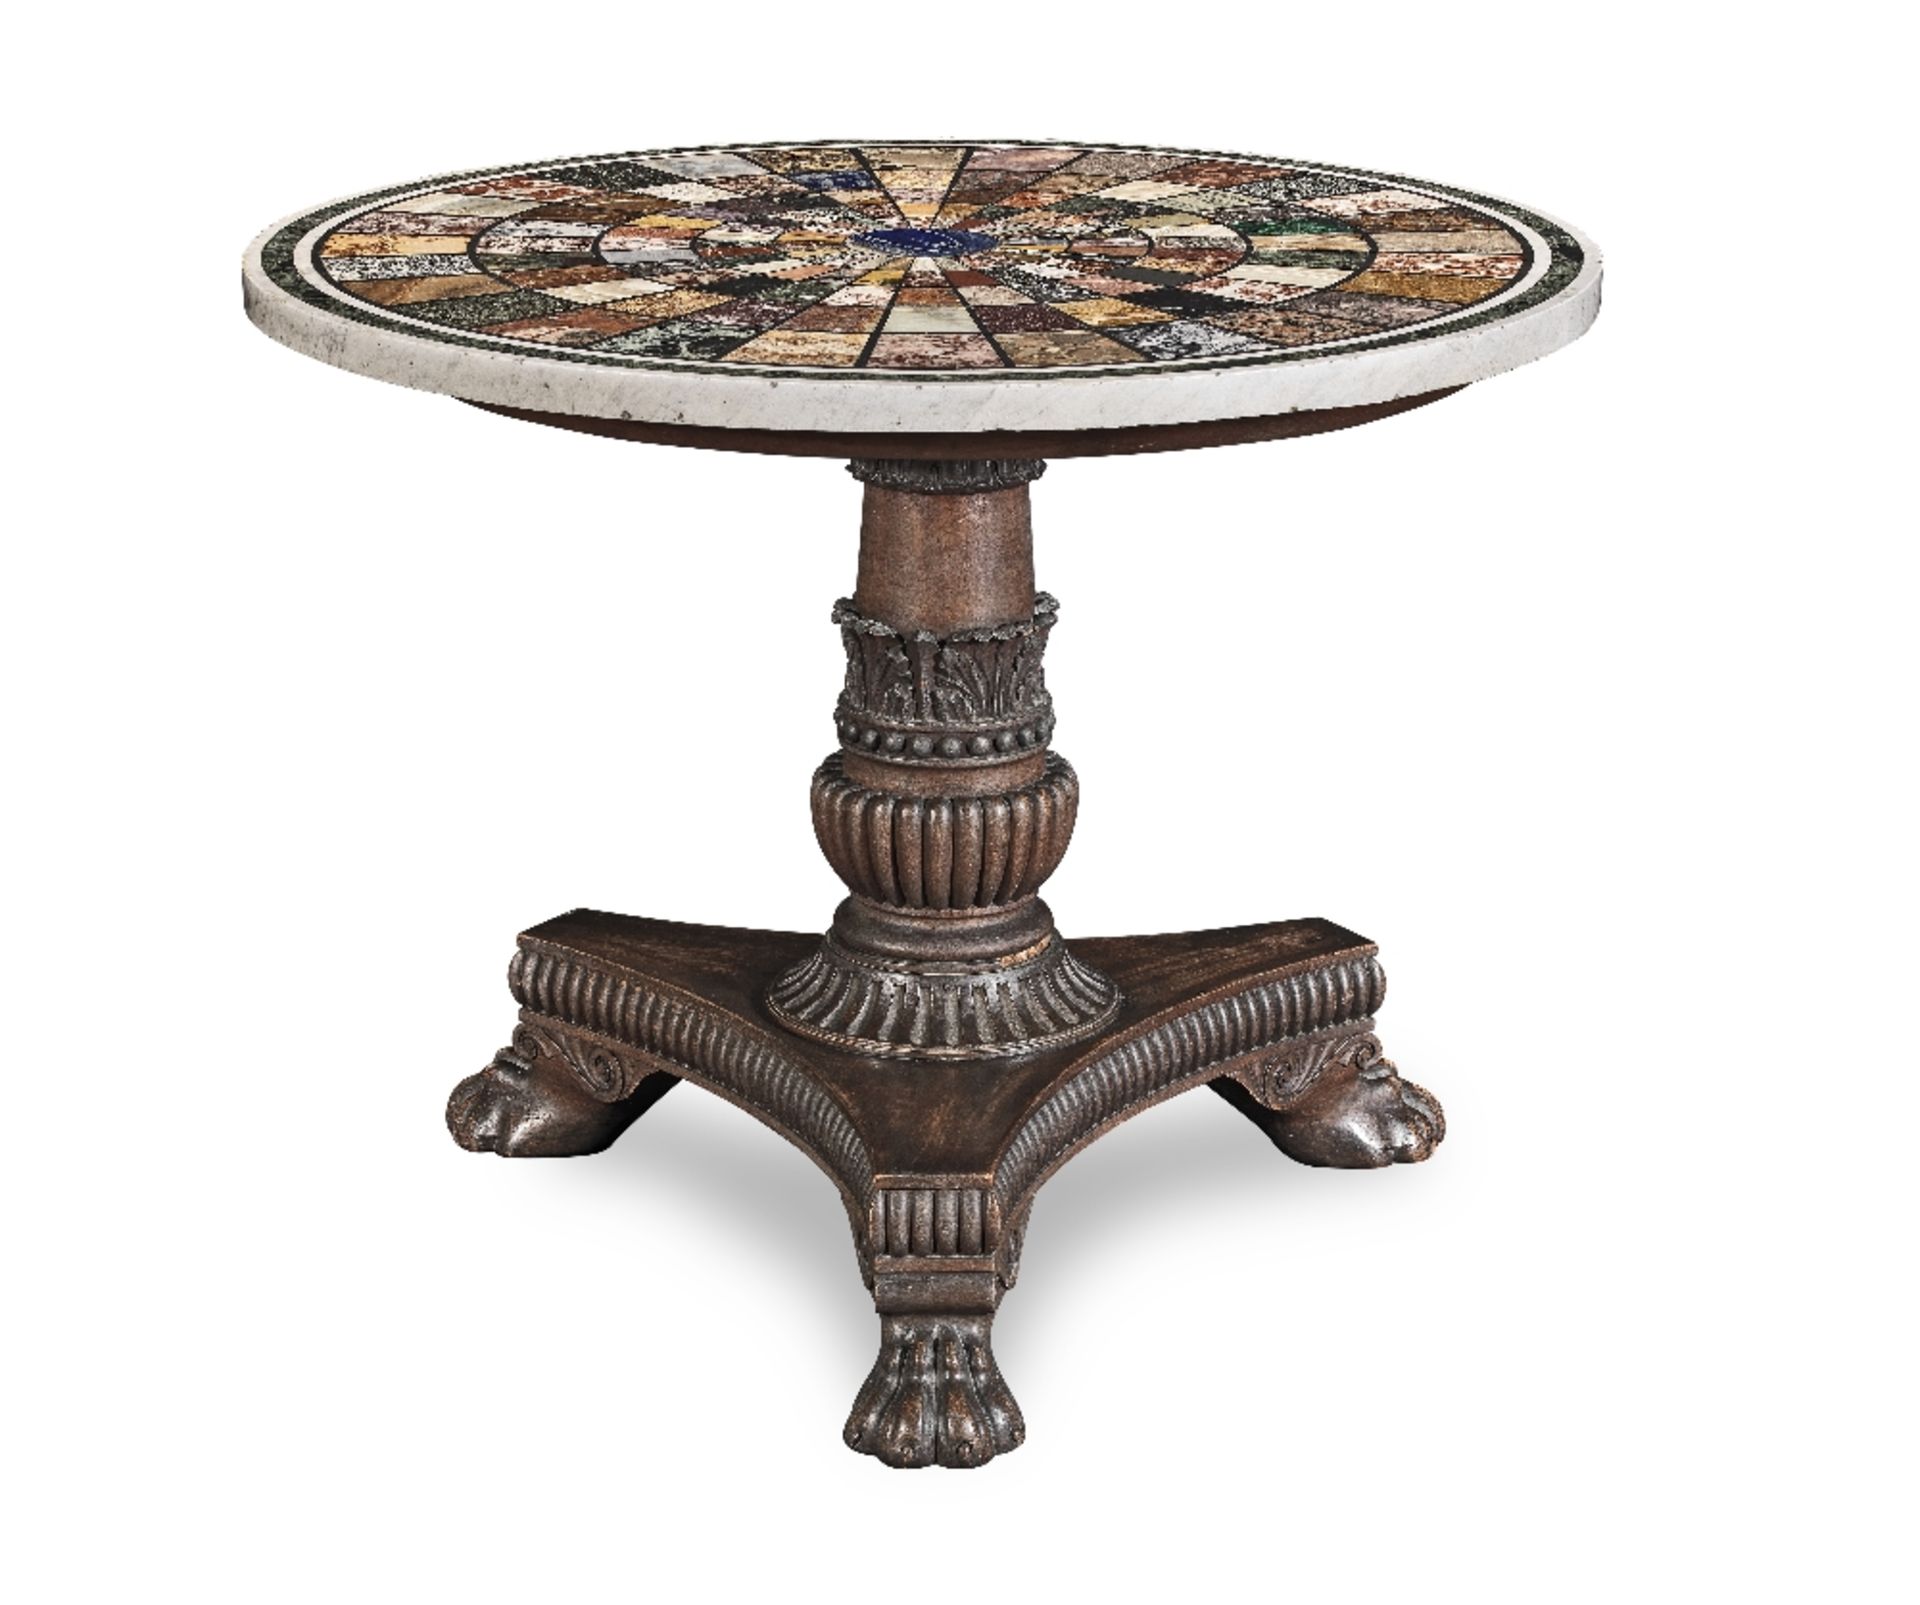 OF GRAND TOUR INTEREST - A Regency or George IV mahogany centre table with an Italian early 19th ... - Image 6 of 9